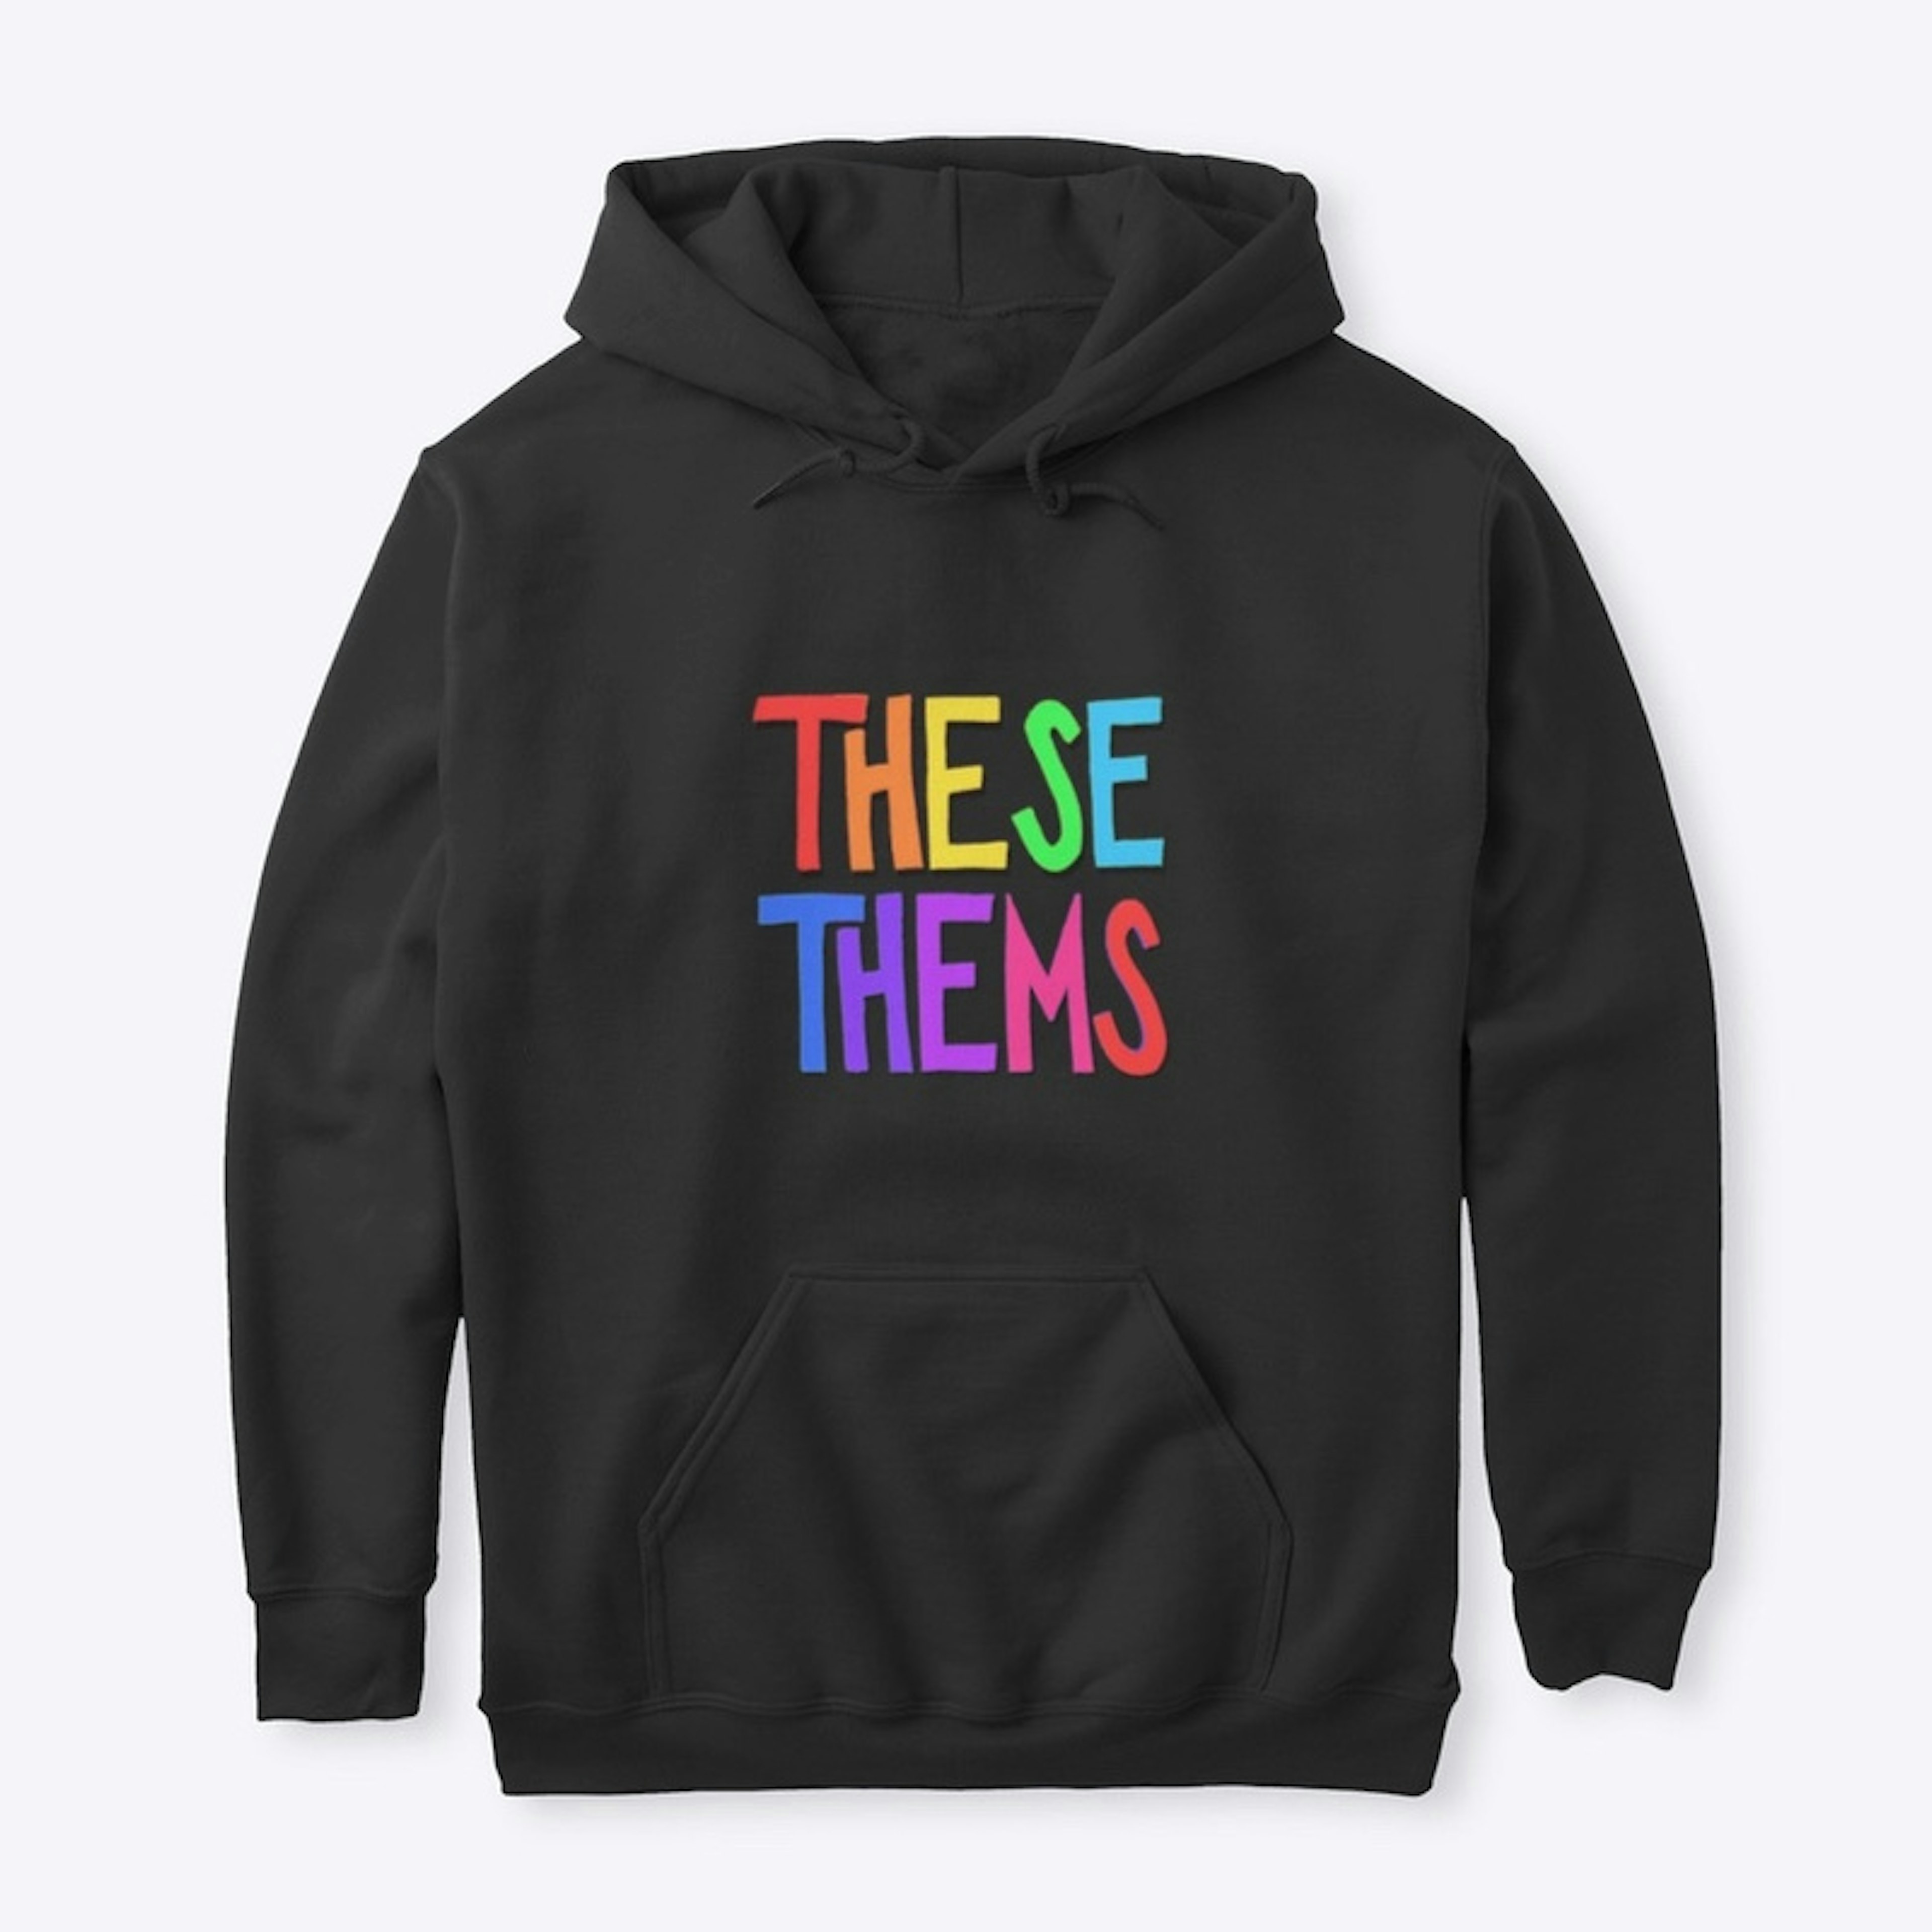 These Thems logo clothing